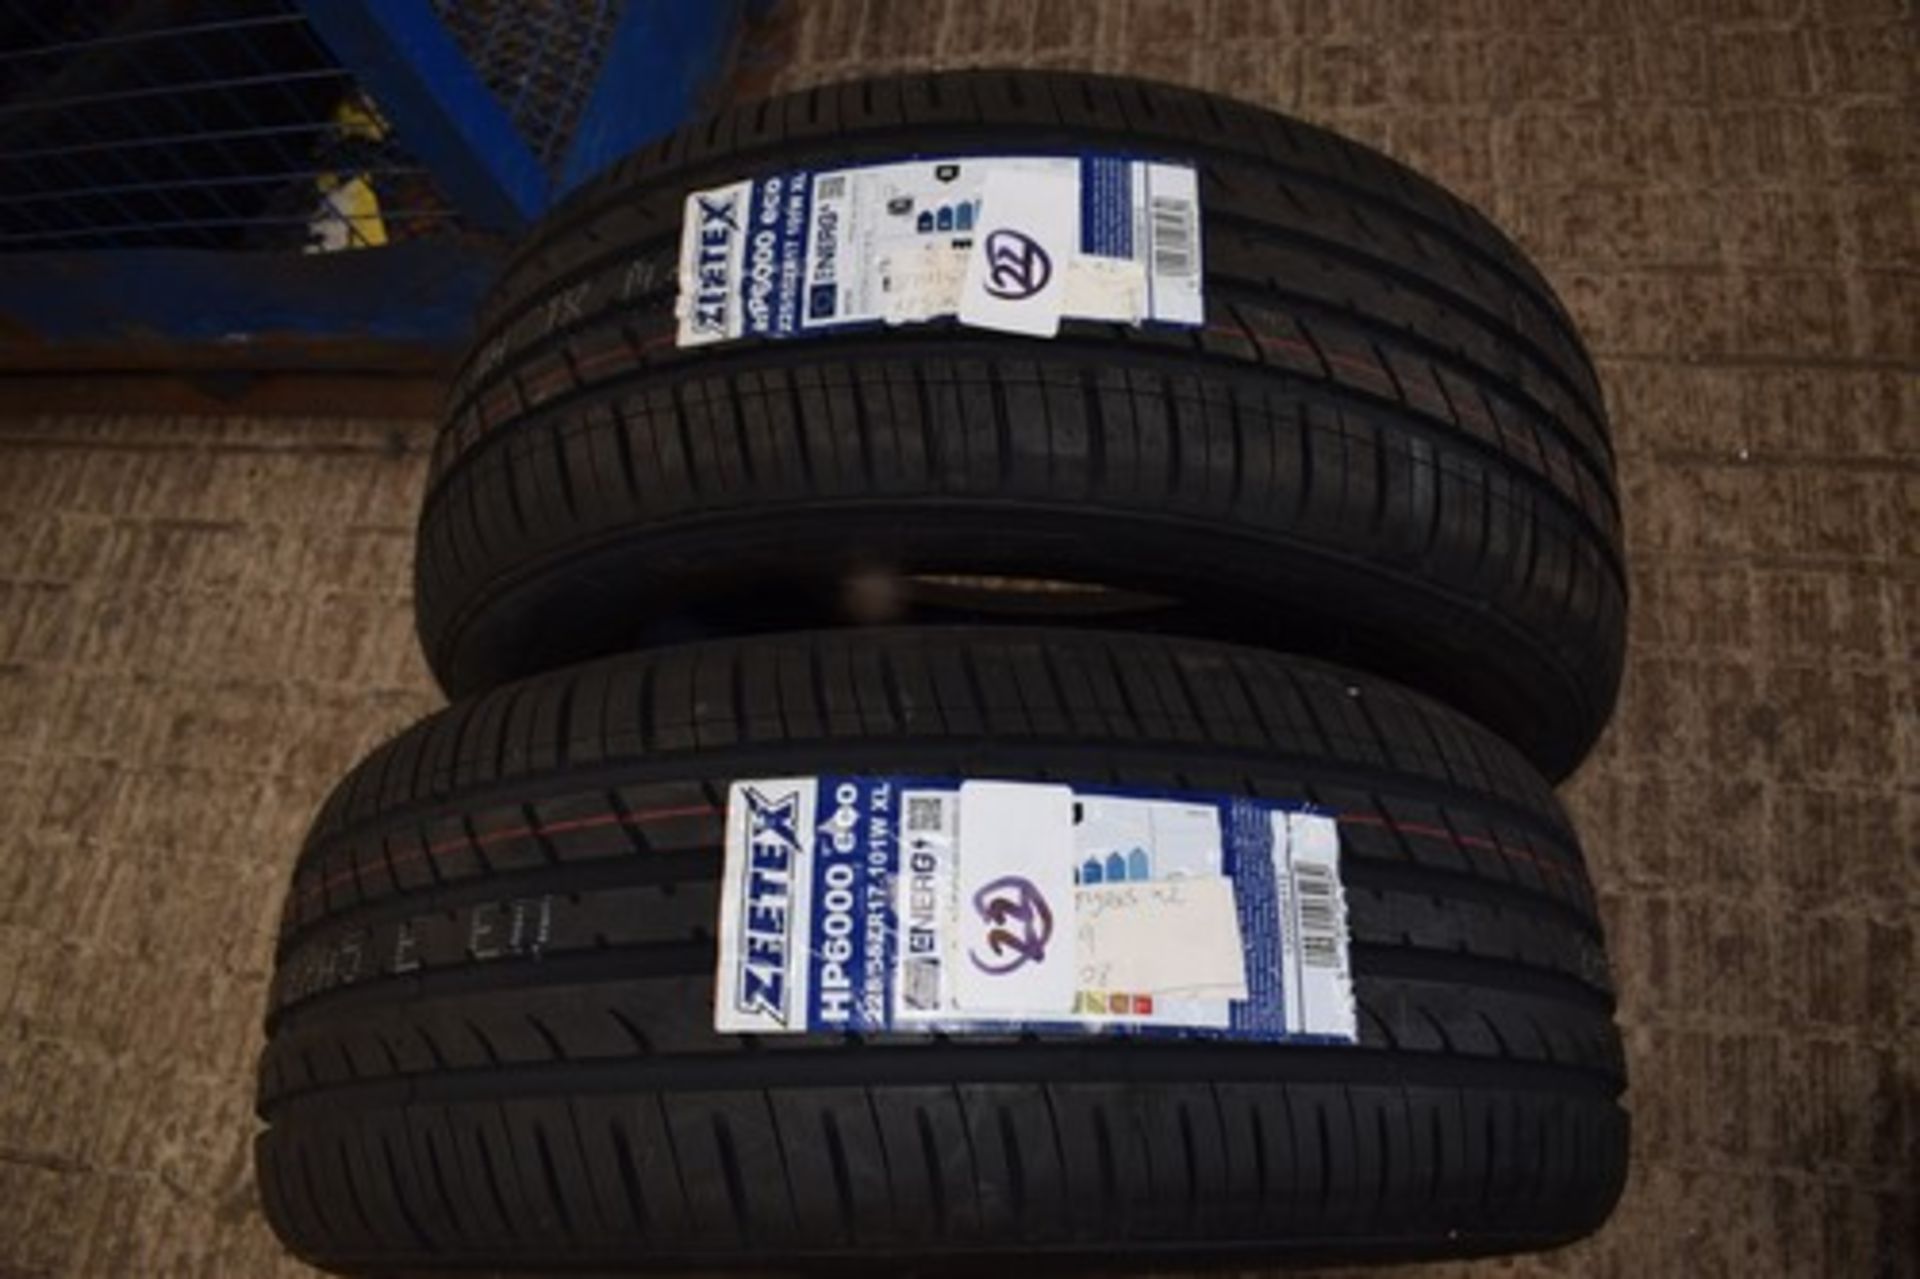 1 x pair of Zeetex HP6000 Eco tyres, size 225/55ZR17 101W XL - new with labels (cage 3)(22)